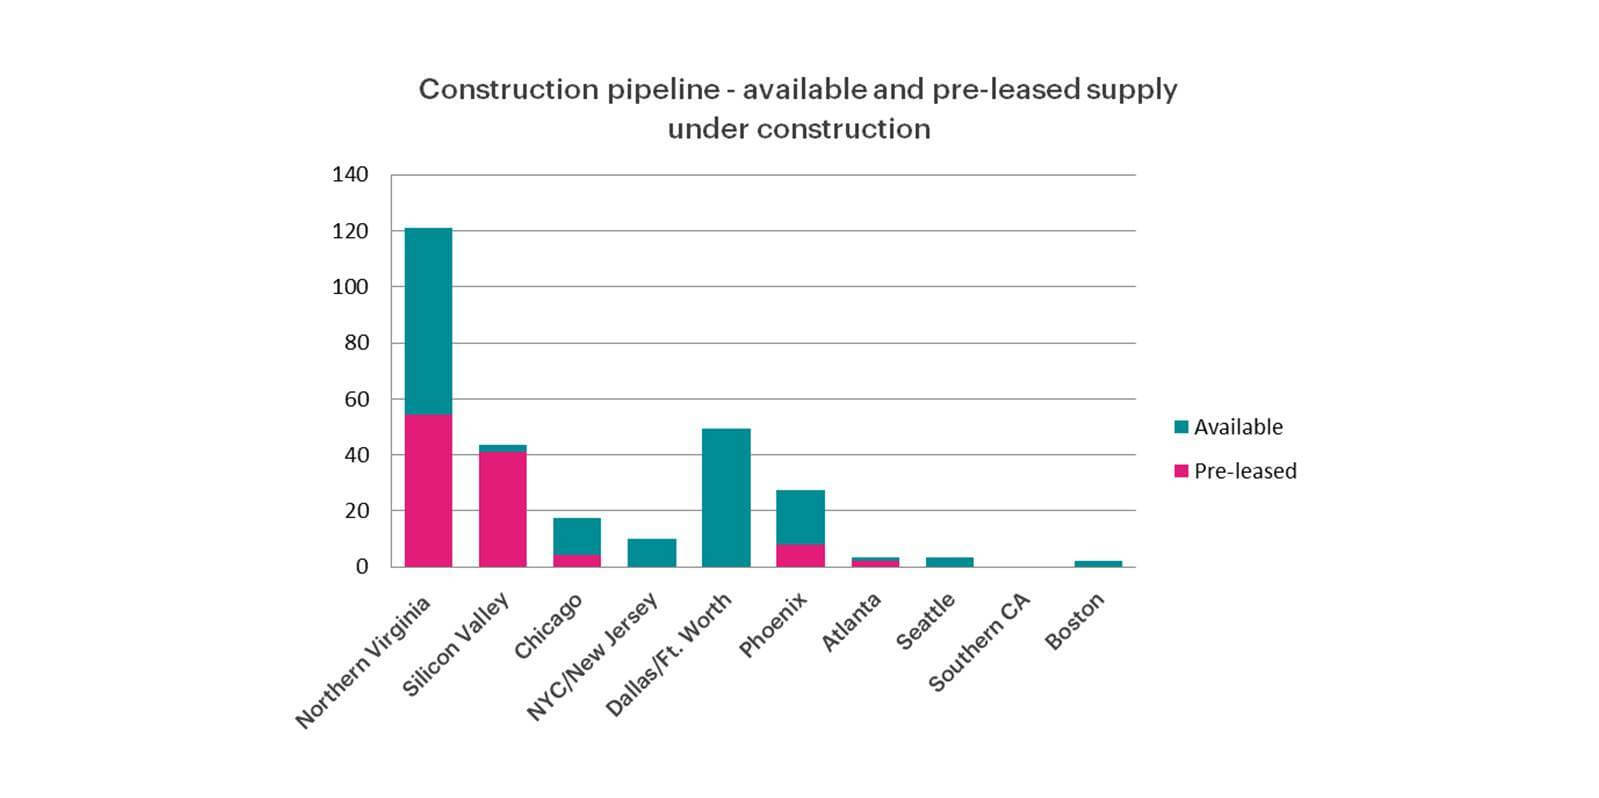 Construction-pipeline-available-and-pre-leased-supply-under-construction-graph